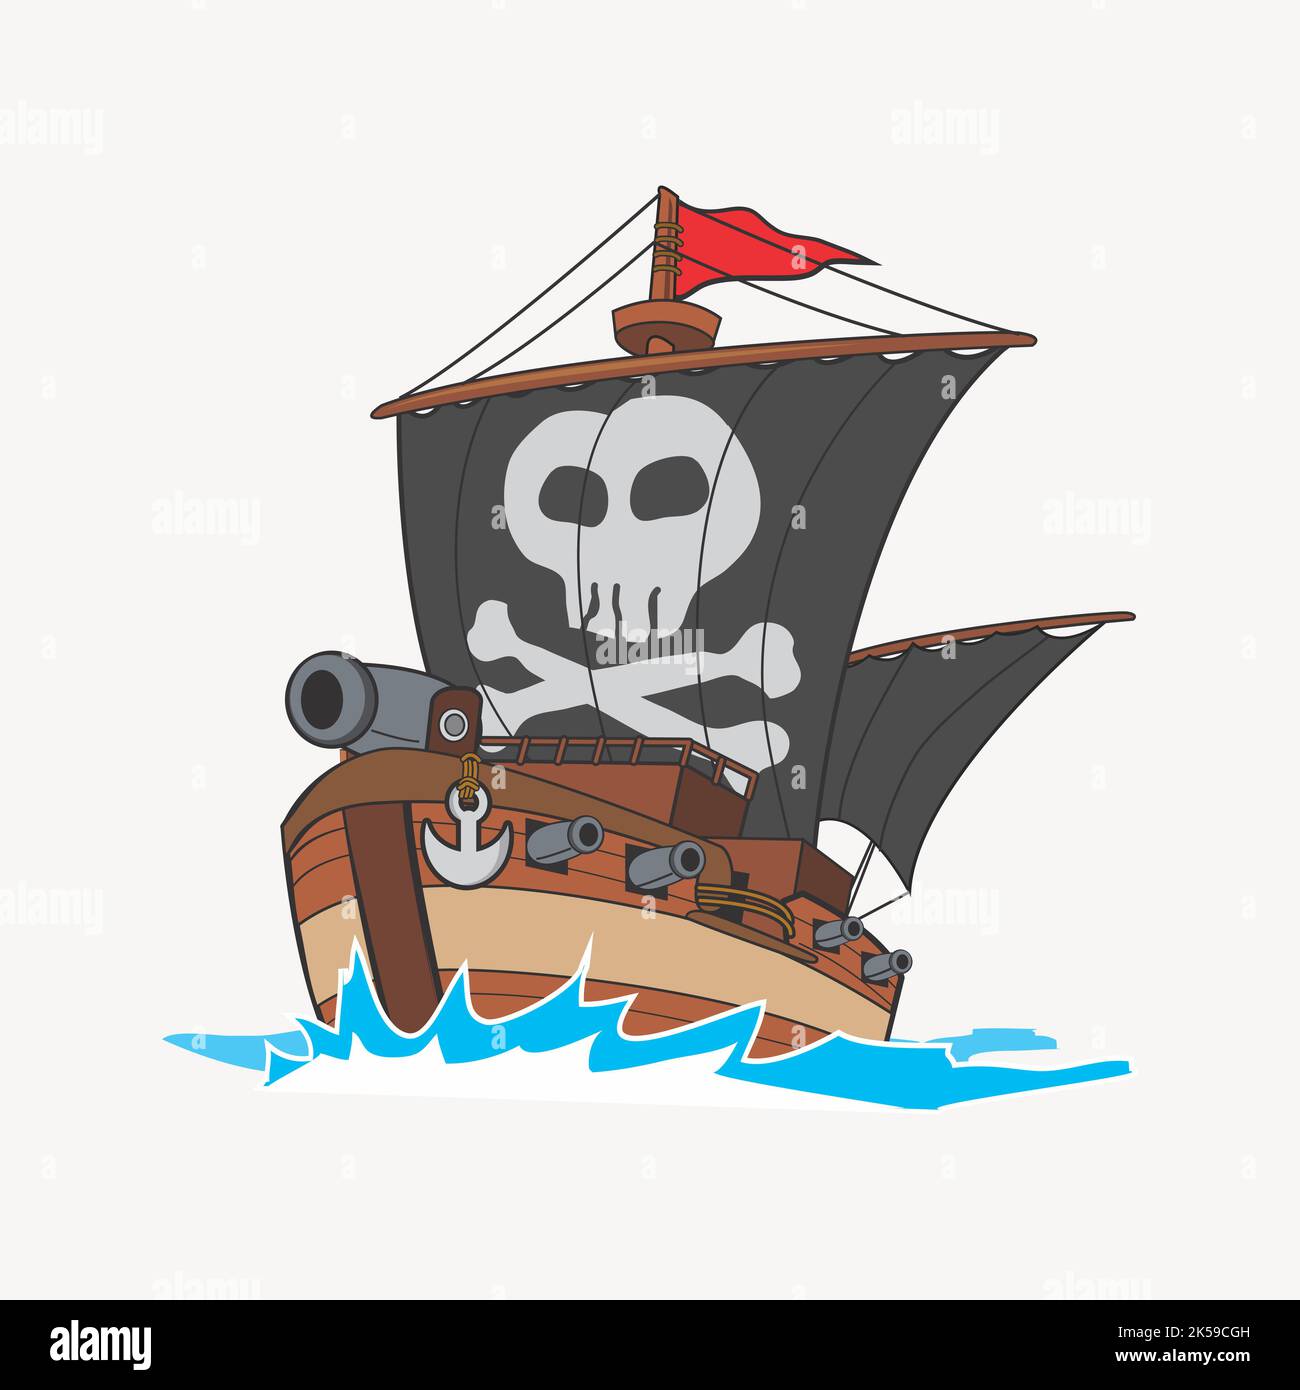 Pirates Stock Vector Images - Alamy